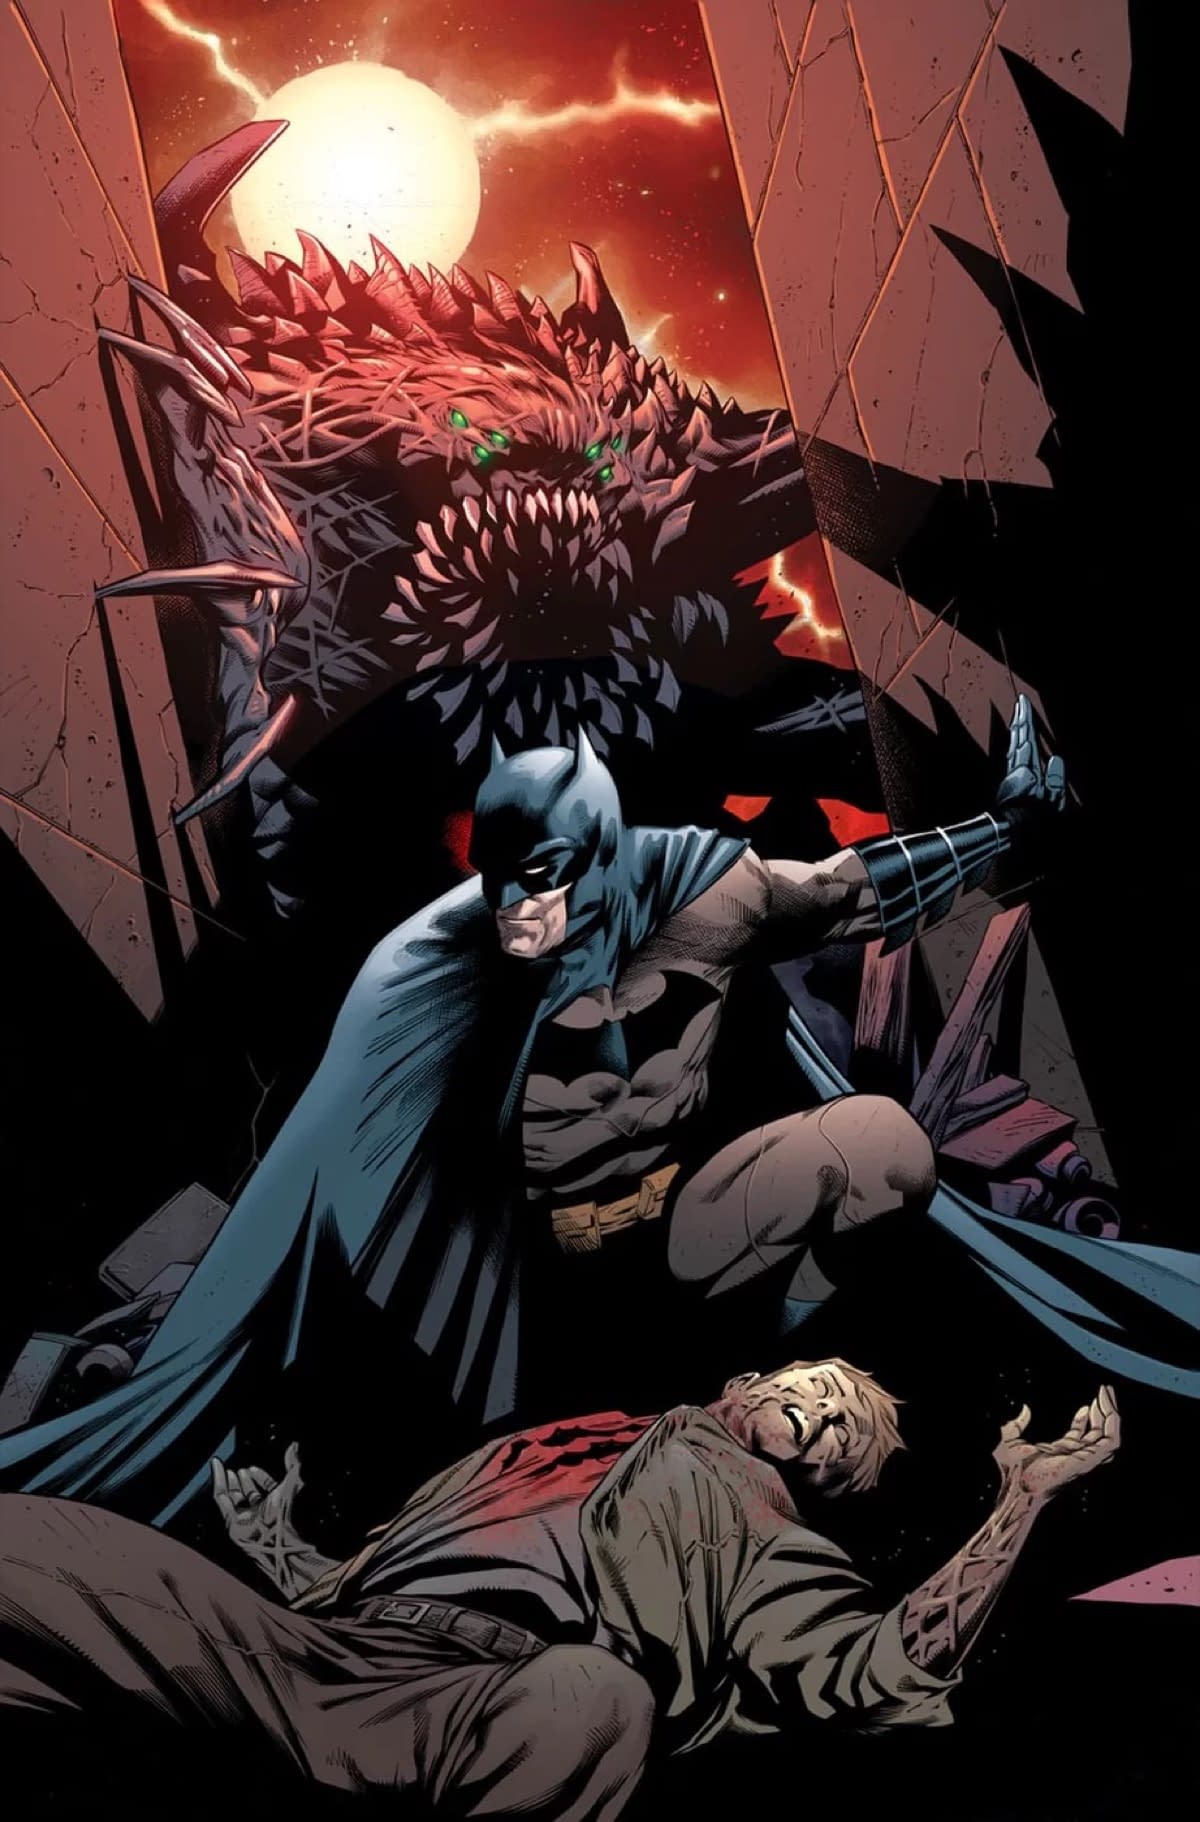 Tom Taylor Writes Detective Comics in December... But Only For One Issue